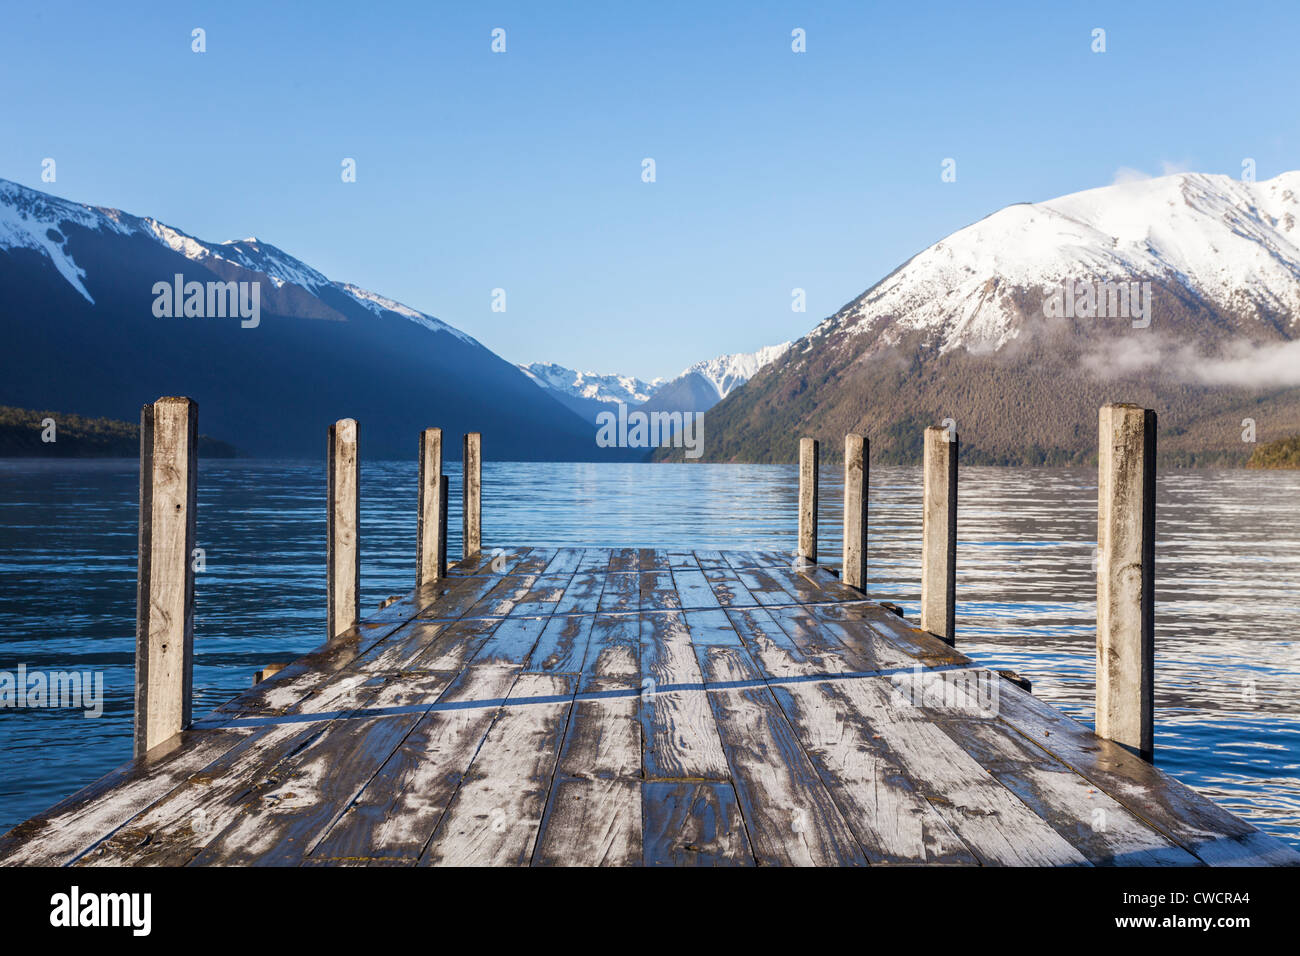 The famous view of the jetty at Lake Rotoiti, Nelson Lakes National Park, New Zealand, on a fresh, clear early spring morning. Stock Photo